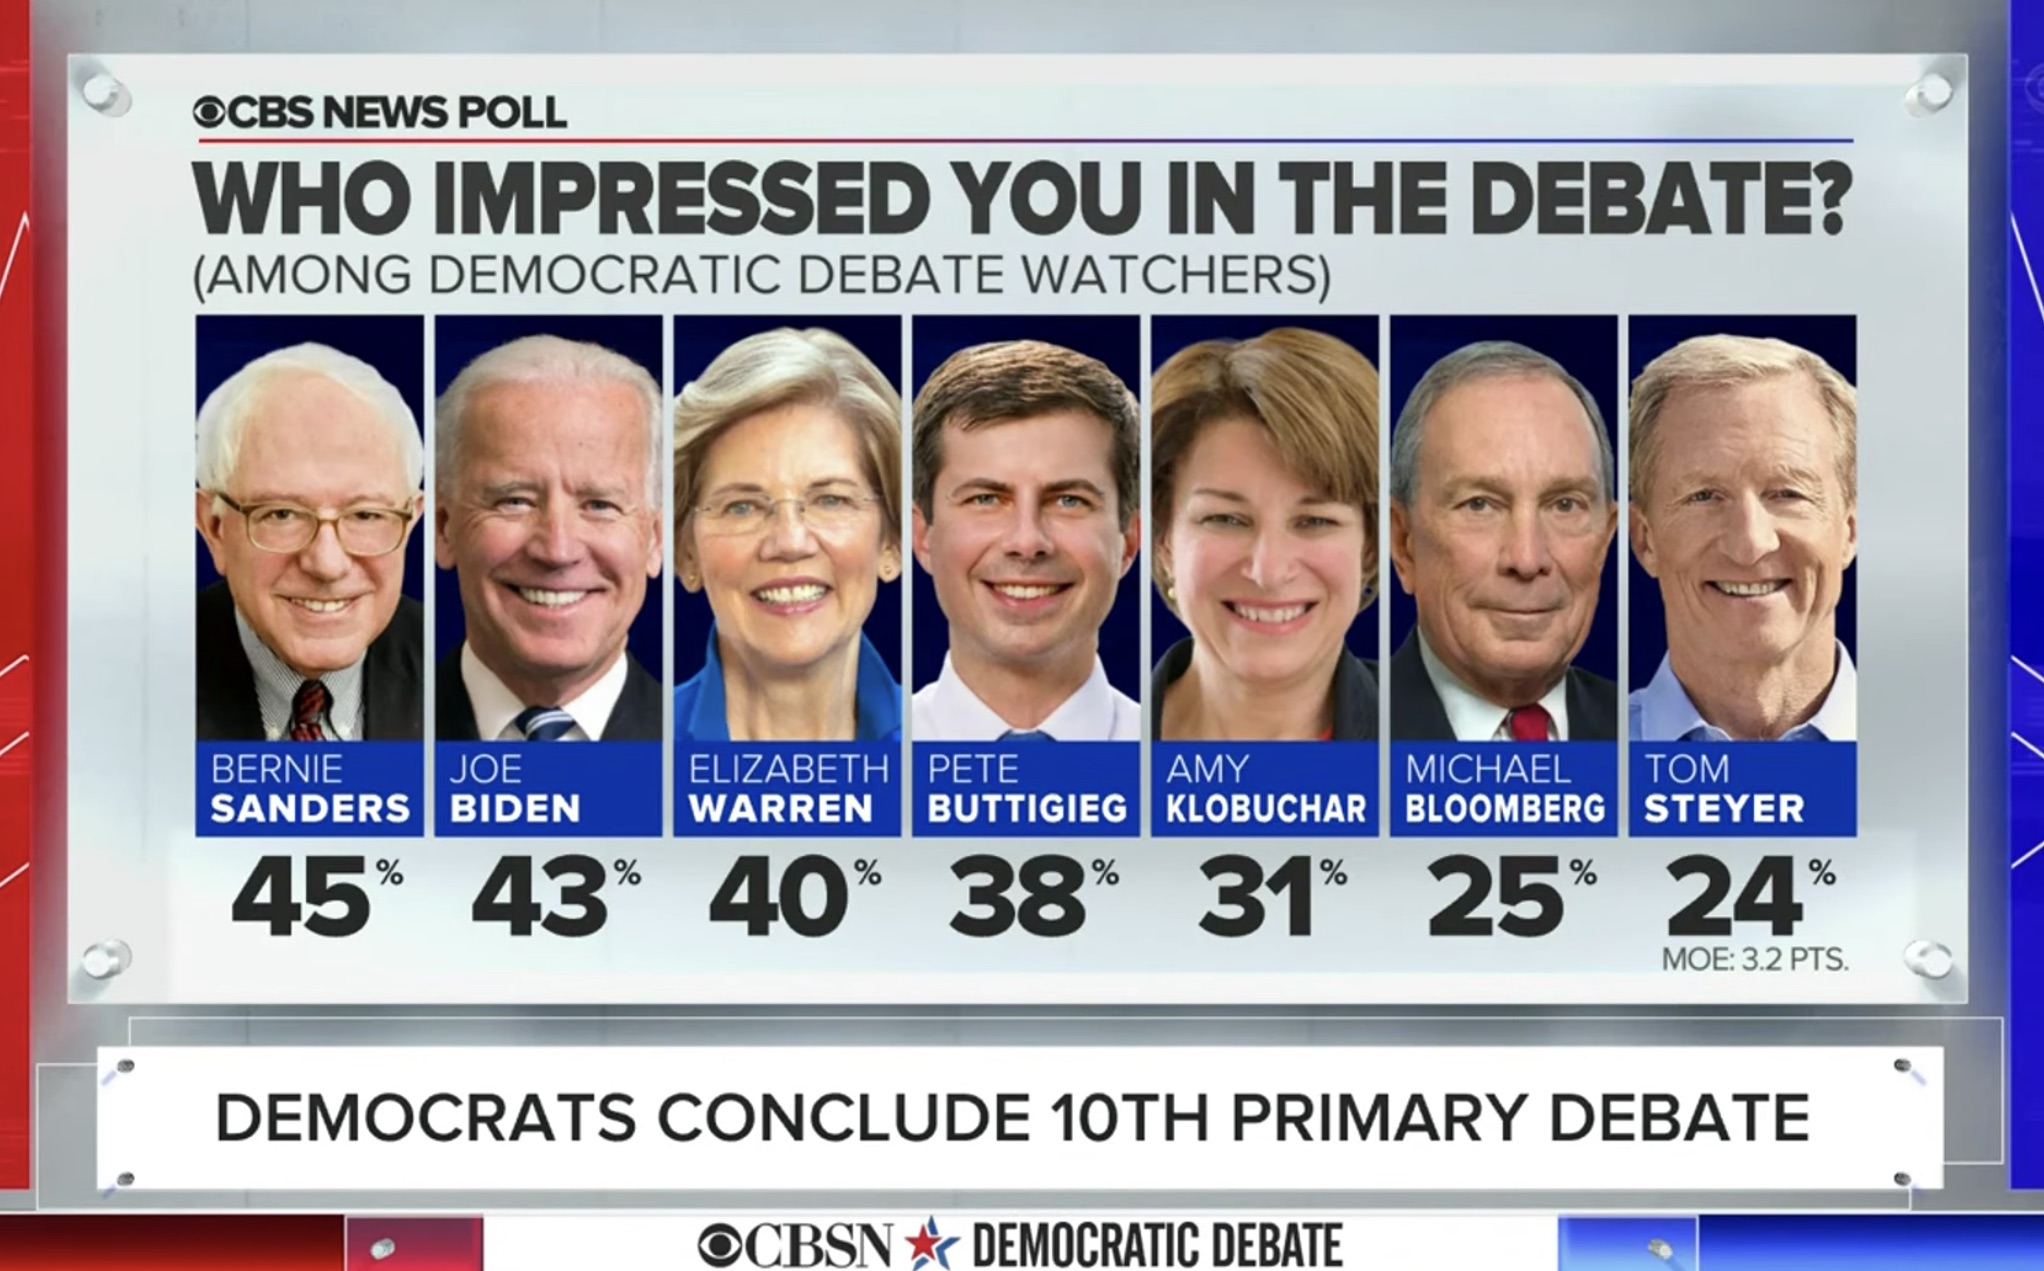 Screen shot of CBS News' poll results after the last Democratic presidential debate